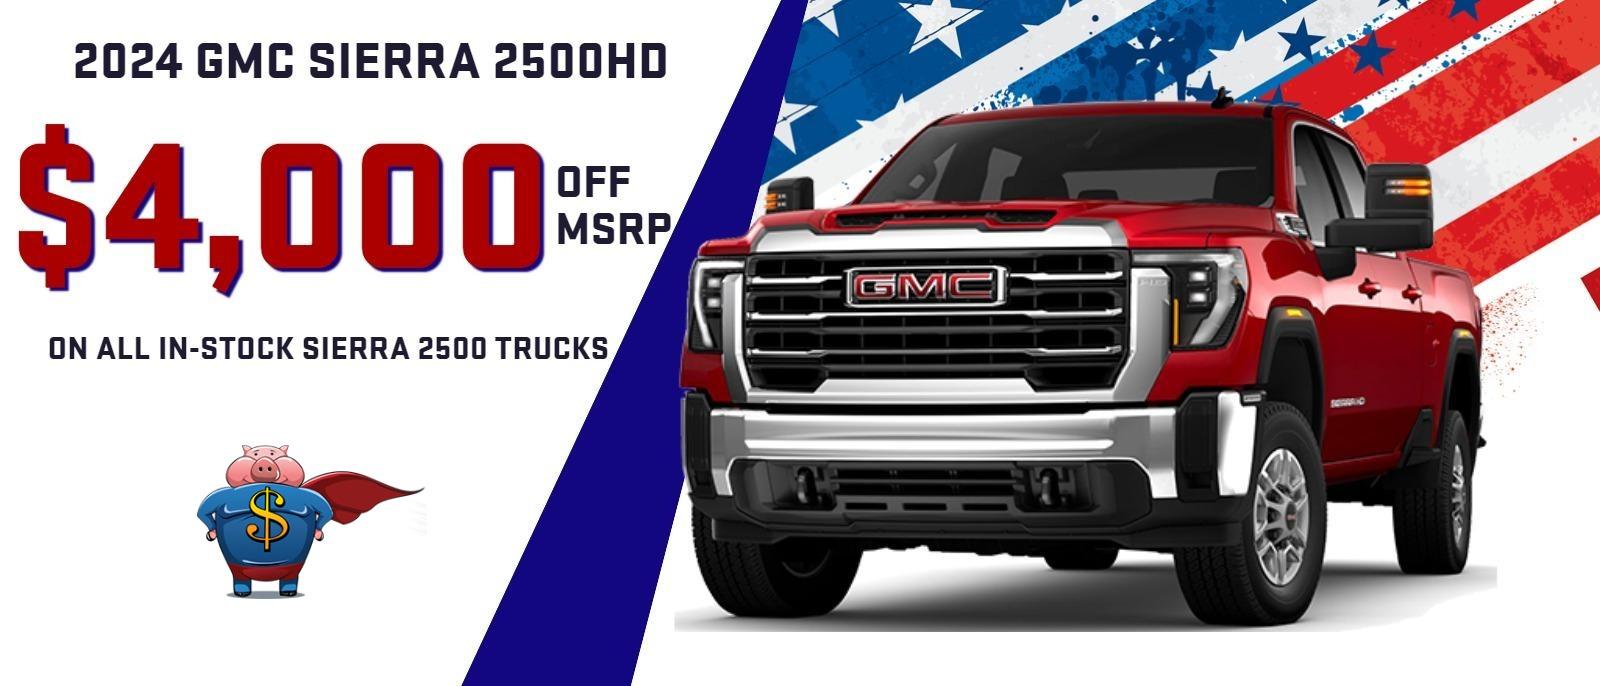 2023 GMC Sierra 2500HD $4,000 Off MSRP (Includes factory and special financing rebates)